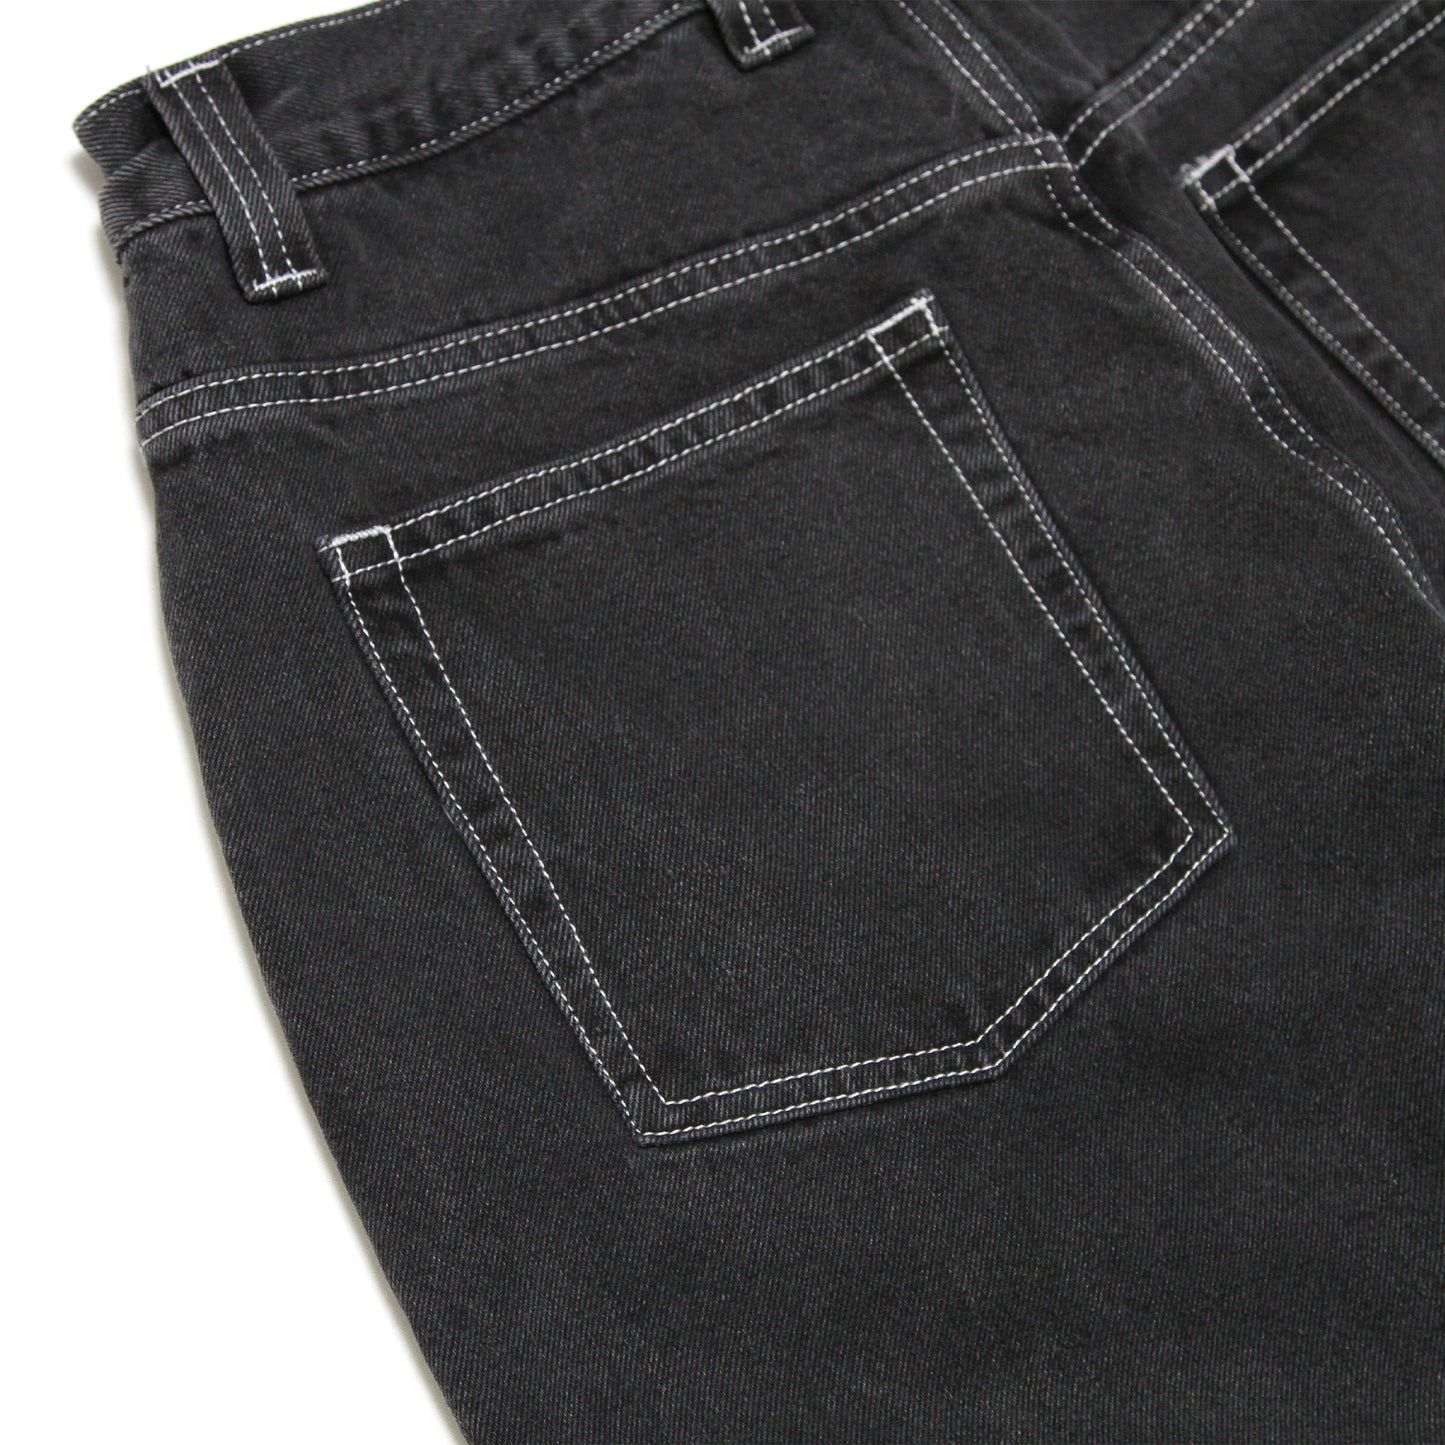 HEAVIES - 03 Jeans/Washed Black